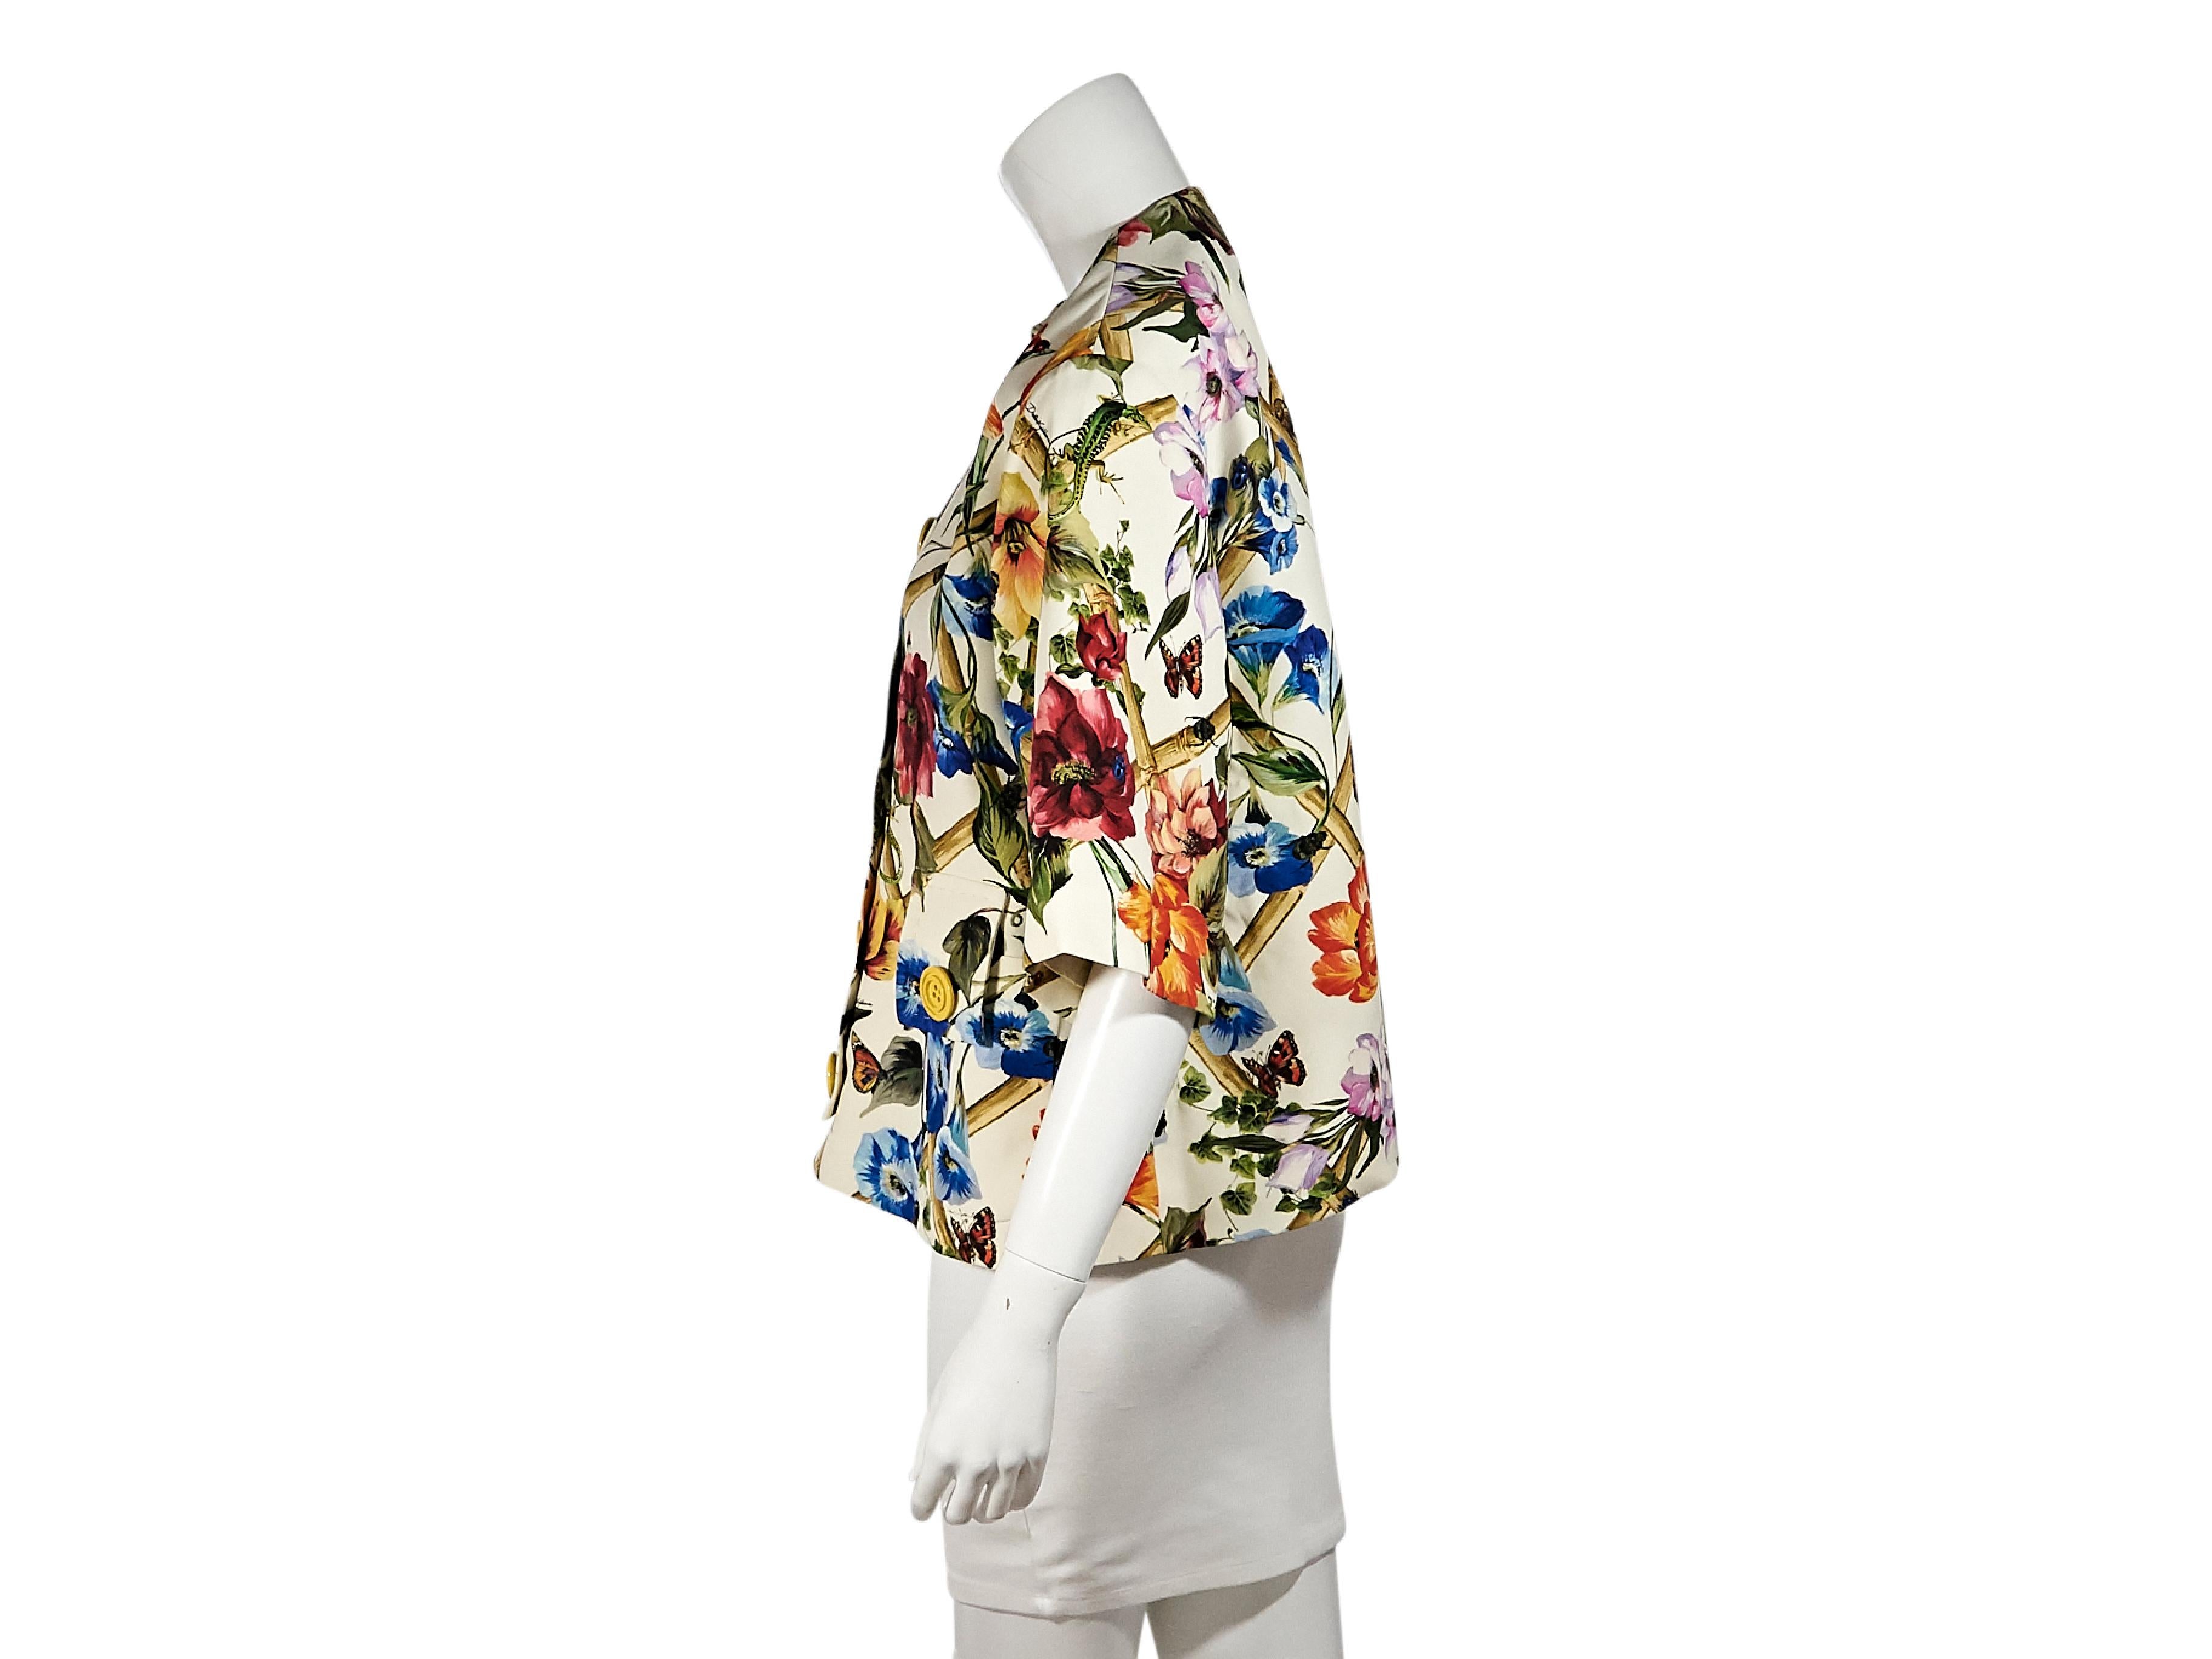 Product details:  Multicolor floral-printed stretch-wool jacket by Dolce & Gabbana.  Crewneck.  Elbow-length sleeves.  Snap-front closure.  Waist button-tab patch pockets.  35.5